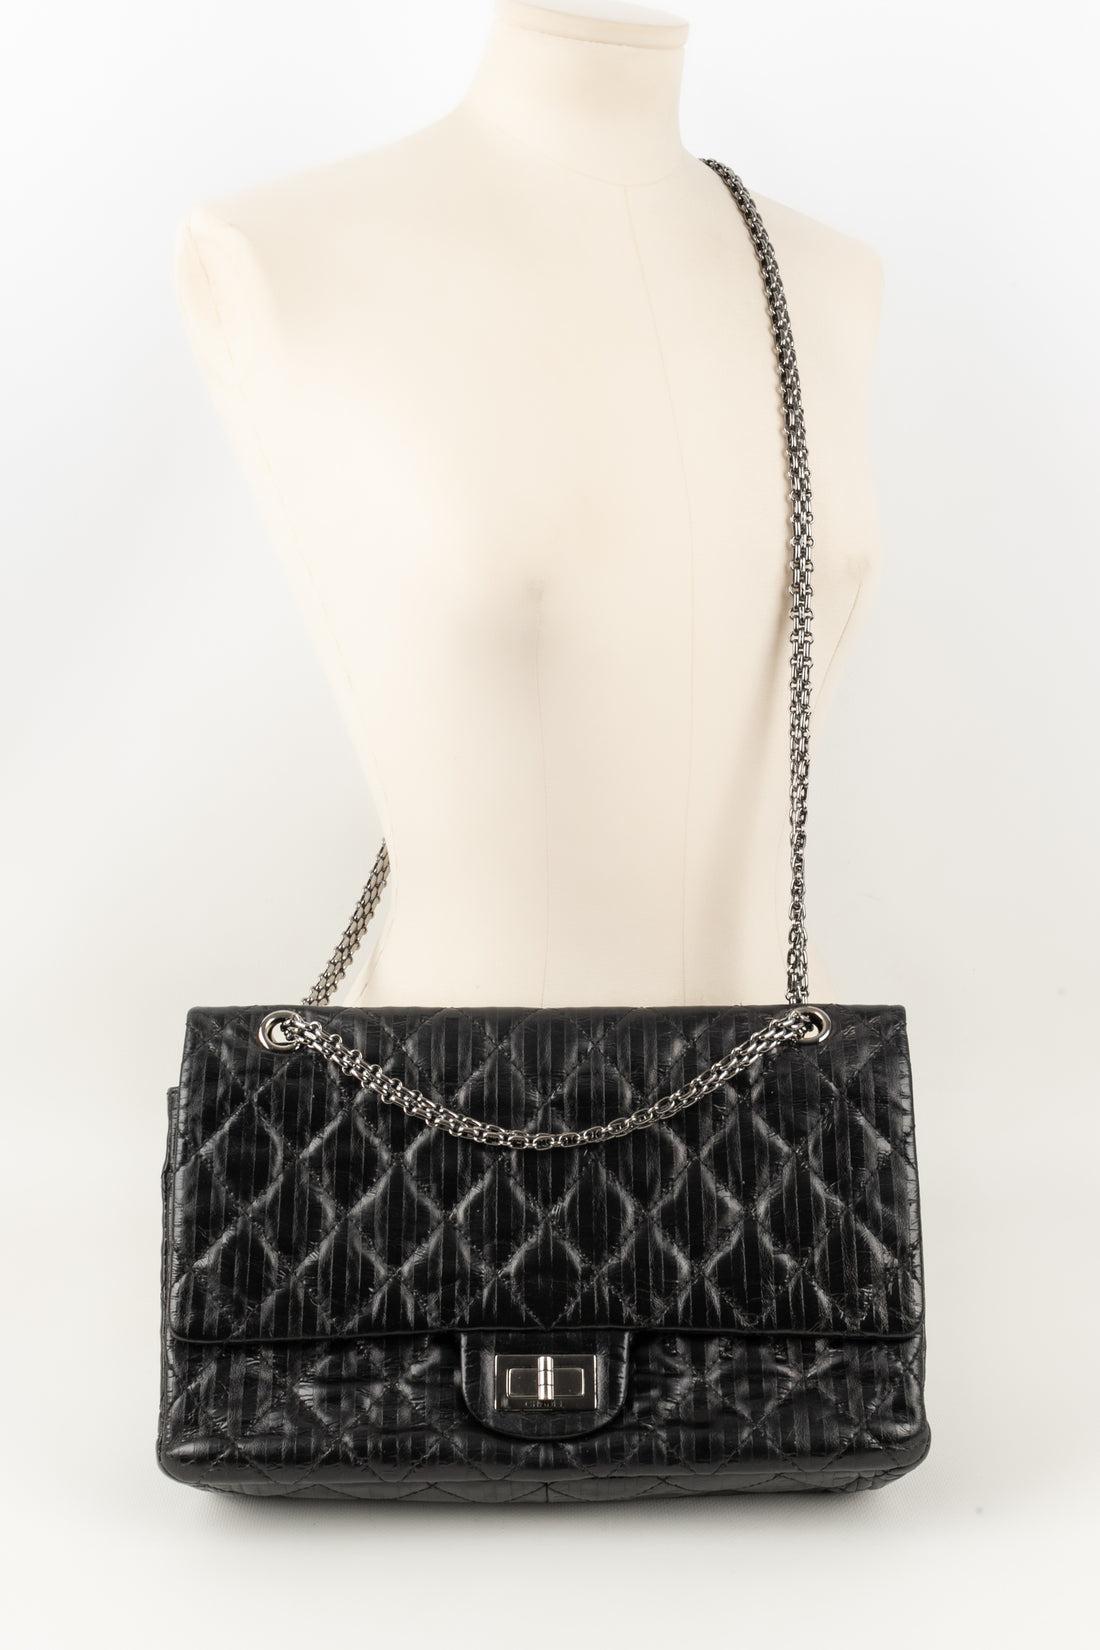 Chanel Black Leather Bag with Silvery Metal Elements, 2008/2009 In Good Condition For Sale In SAINT-OUEN-SUR-SEINE, FR